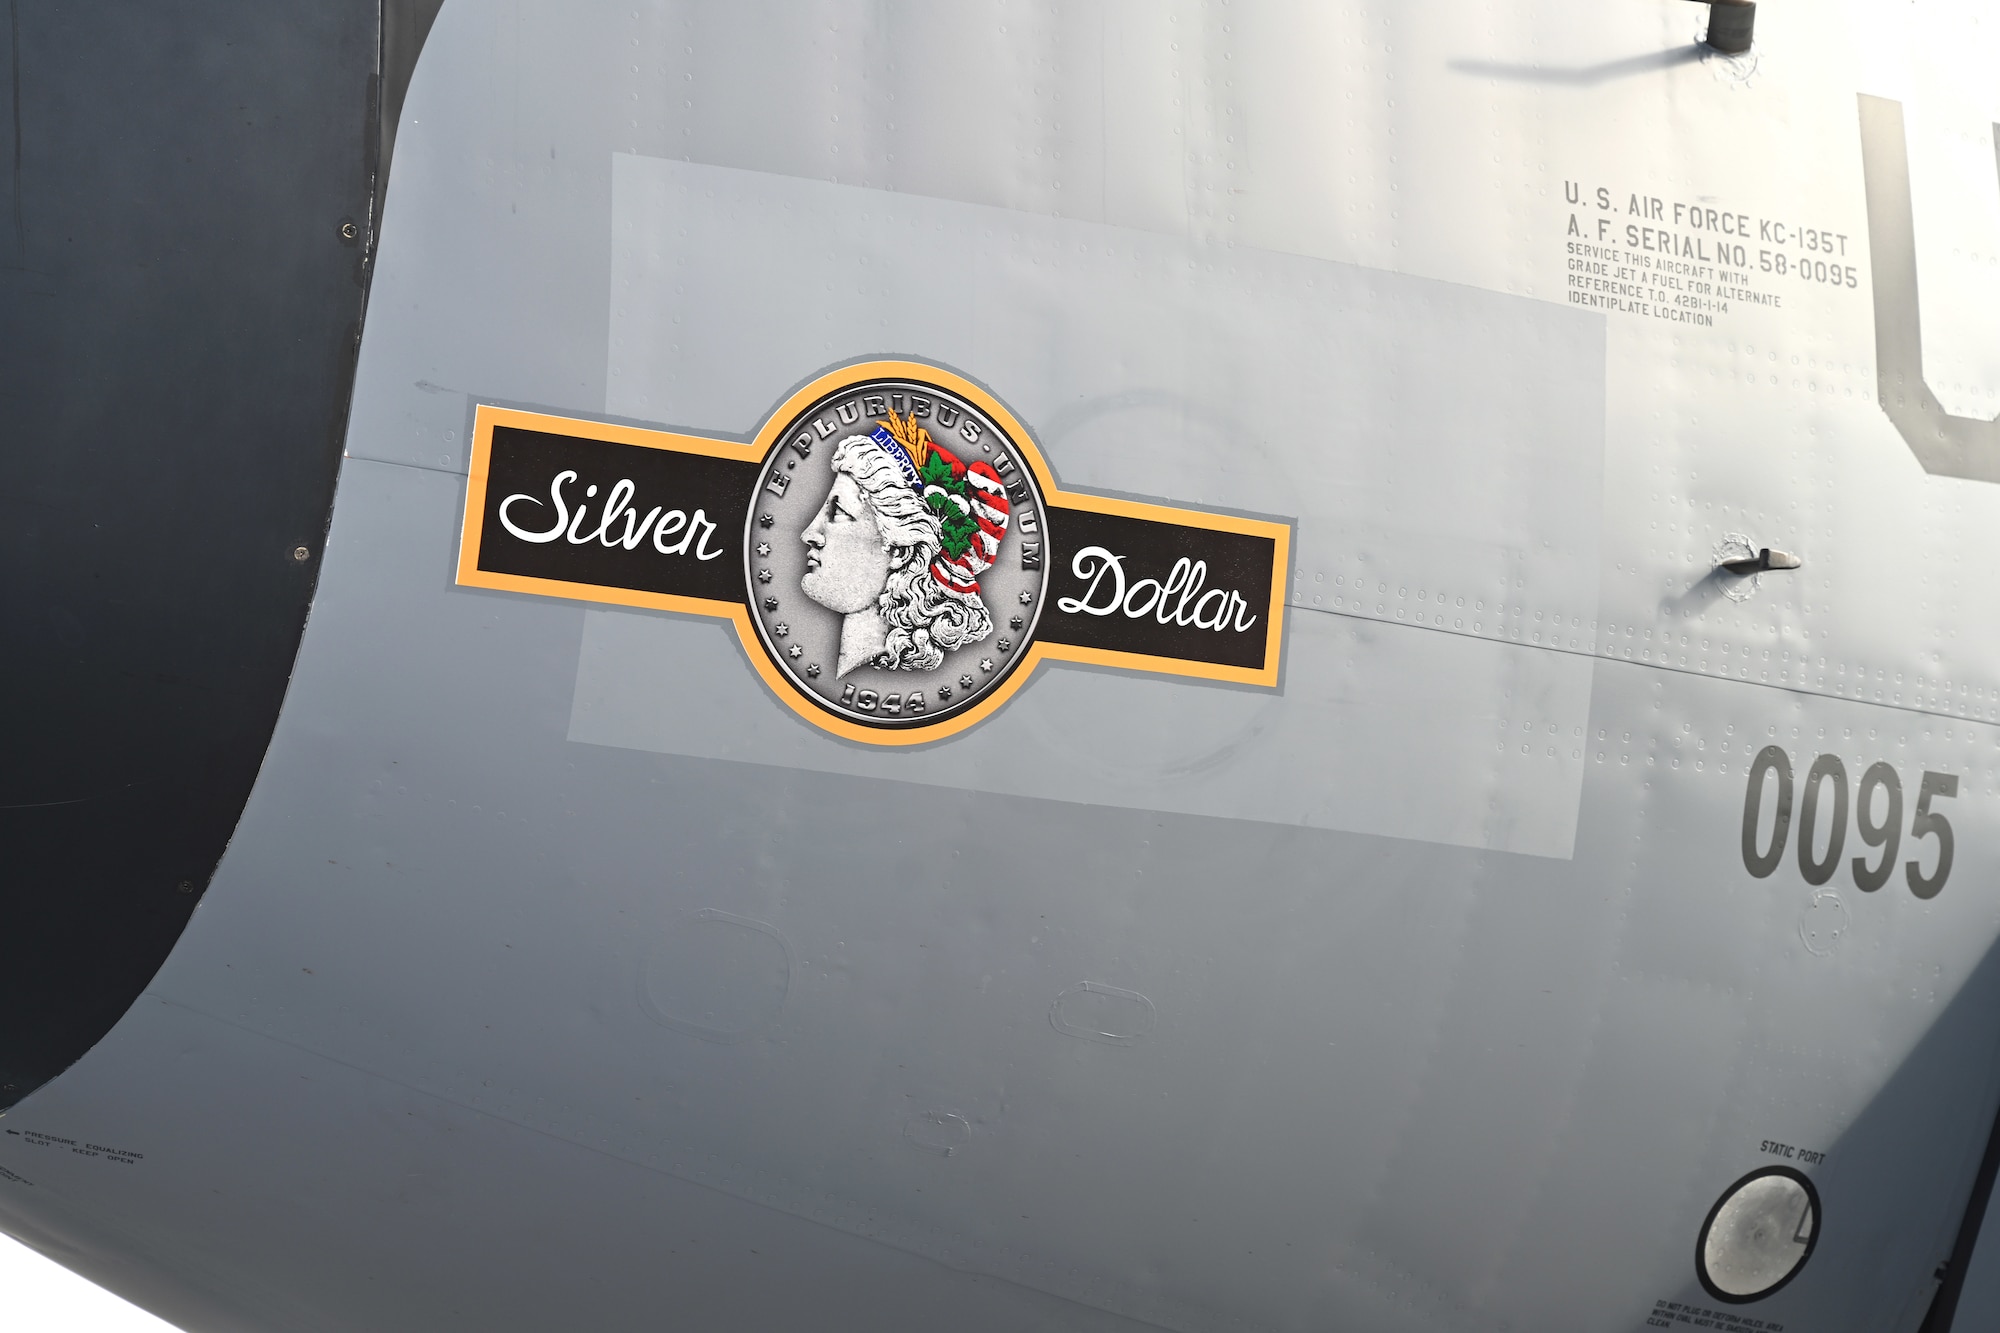 The latest of the 100th Air Refueling Wing’s heritage nose art, “Silver Dollar,” is shown off after its unveiling during the nose art dedication ceremony at Royal Air Force Mildenhall, England, Oct. 10, 2023. The nose art is based on one from the 100th Bomb Group at Thorpe Abbotts, Norfolk, England, during World War II. U.S. Air Force Staff Sgt. Tyler Goldsborough, formerly 100th Aircraft Maintenance Squadron, now stationed at Tinker Air Force Base, Okla., designed the nose art – the first of RAF Mildenhall’s tanker fleet to sport double-sided nose art based on a Silver Dollar coin – now showcased on the side of a KC-135 Stratotanker. (U.S. Air Force photo by Karen Abeyasekere)